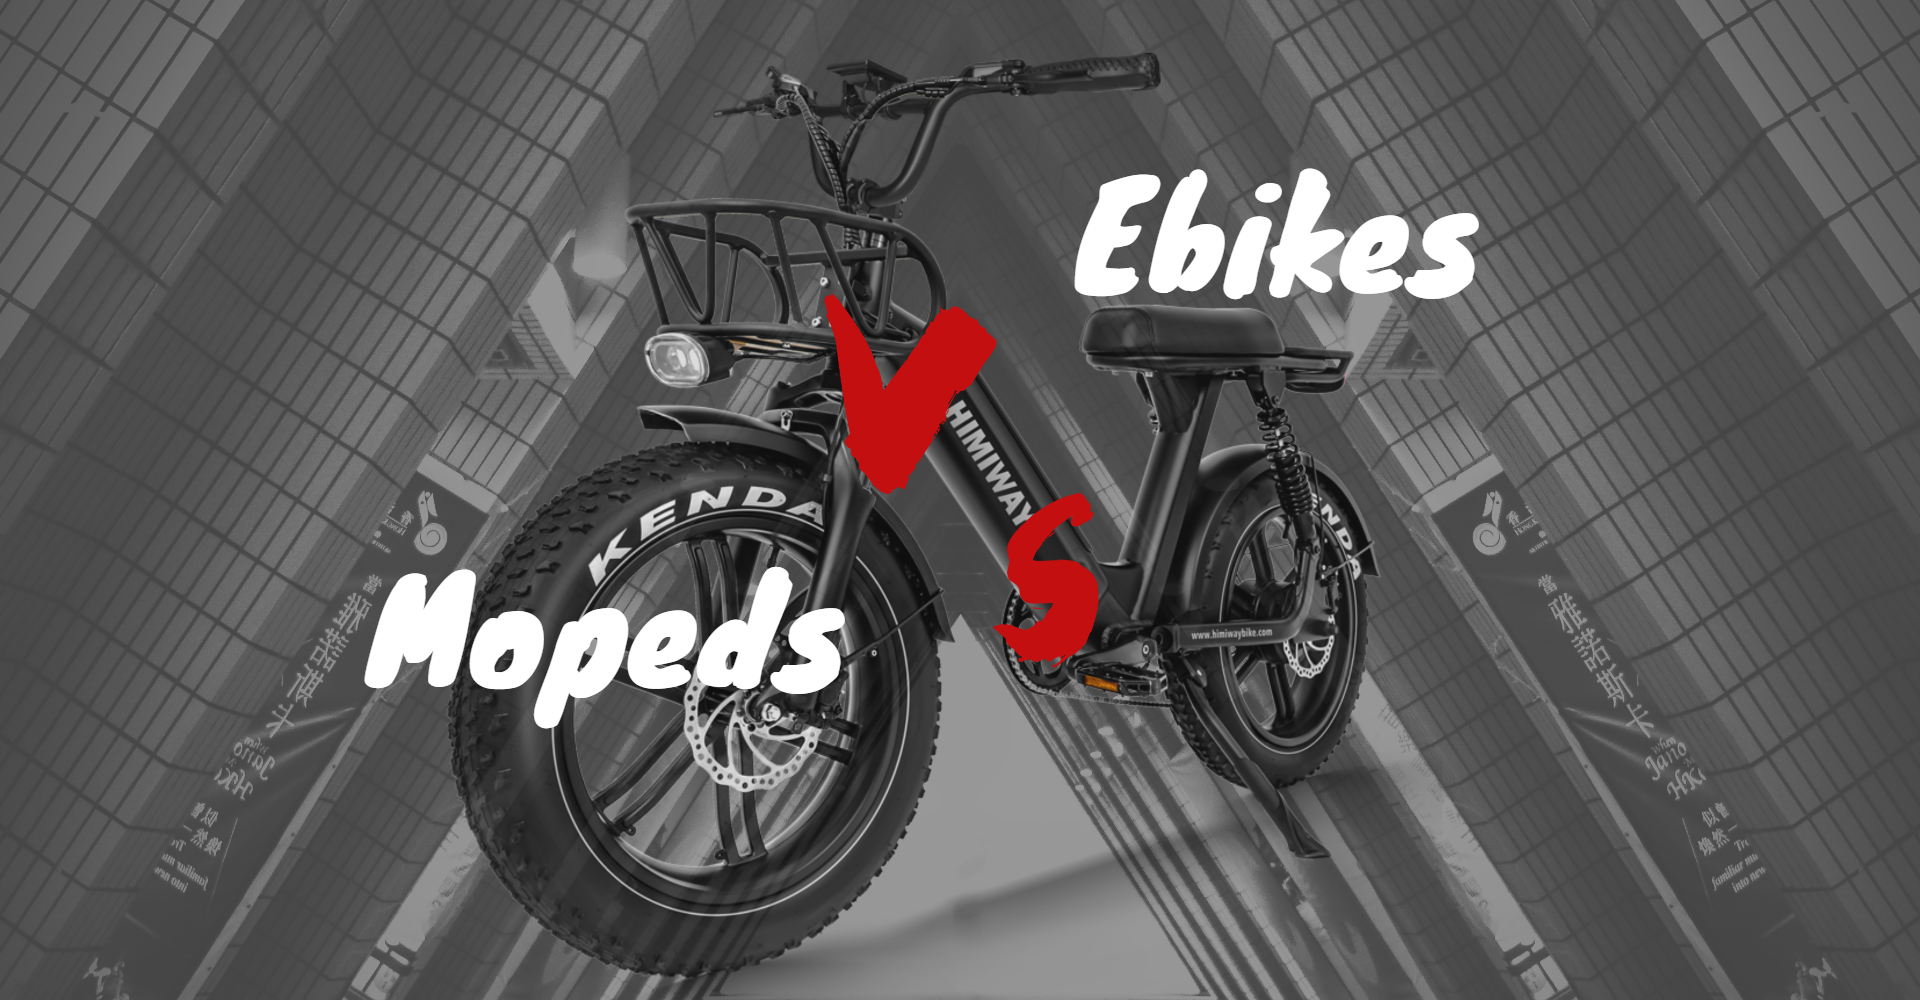 Moped and electric bikes comparison